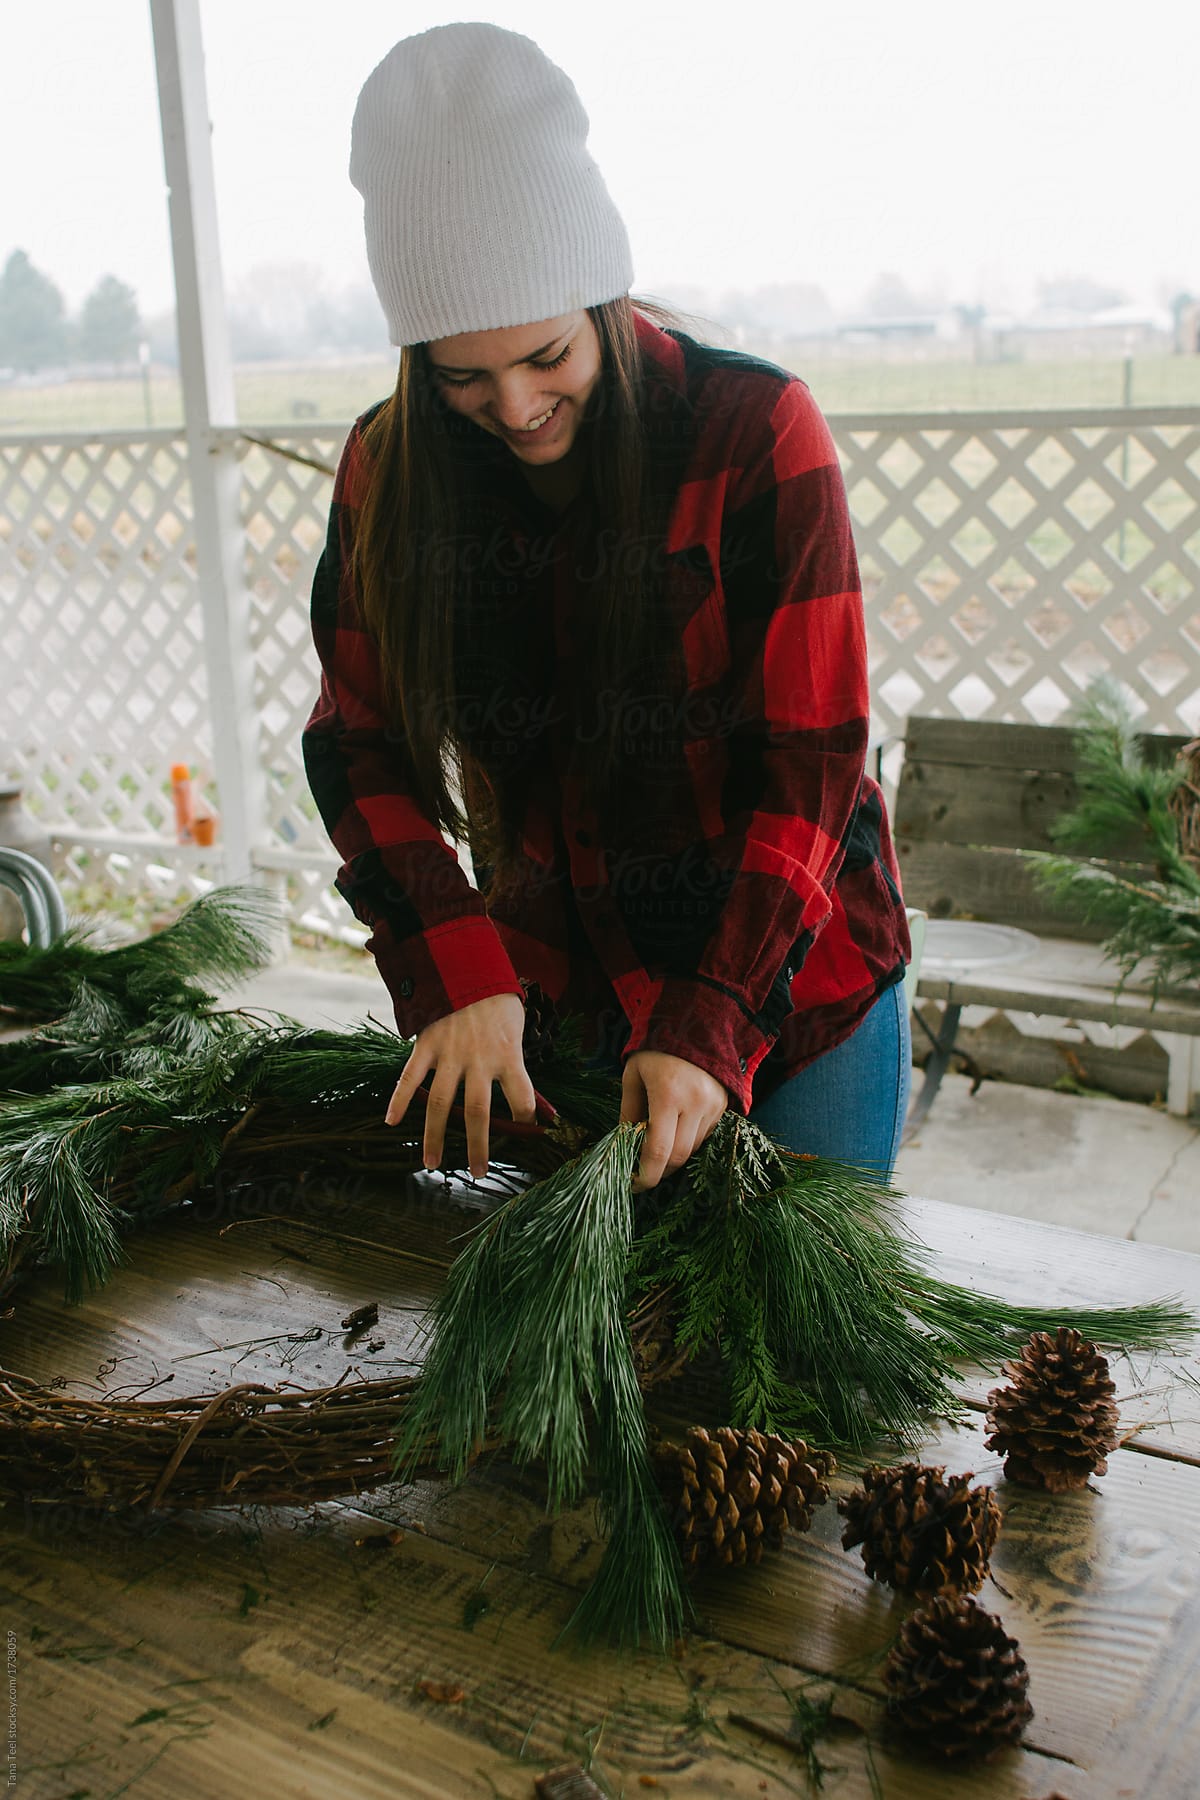 young woman making holiday wreath